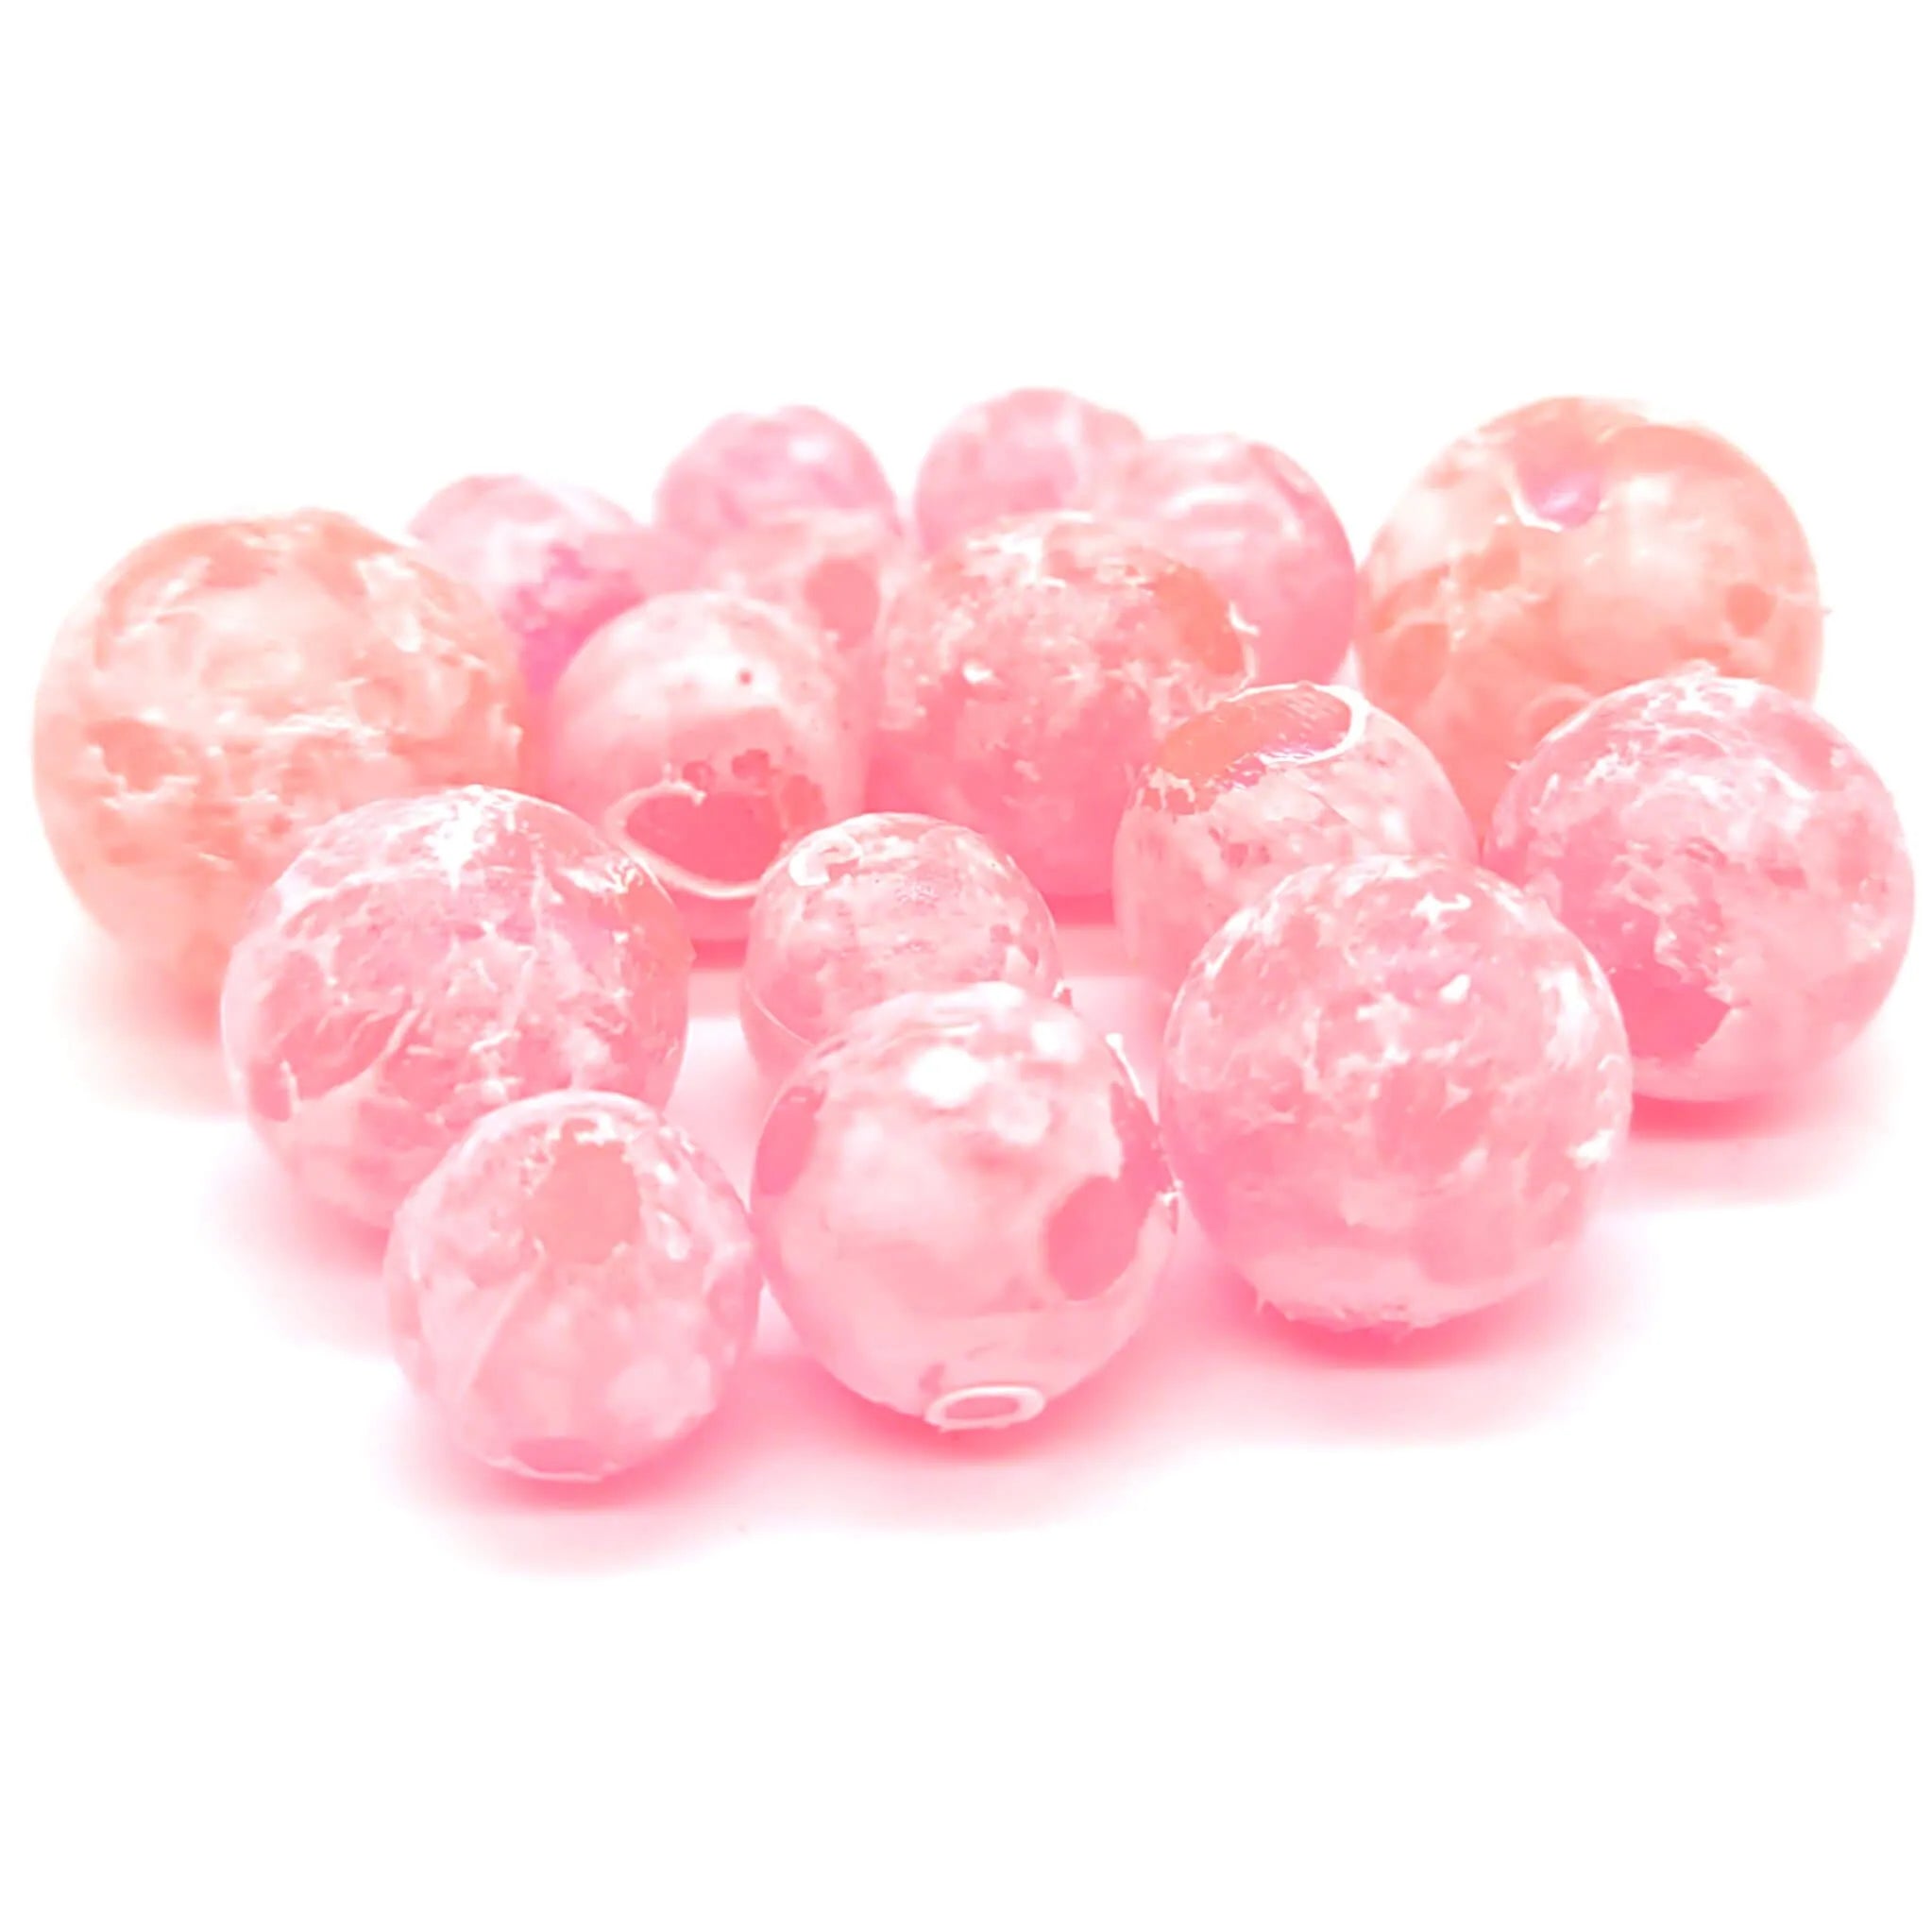 BnR Tackle - The Pink Sheen Soft Bead has been busy